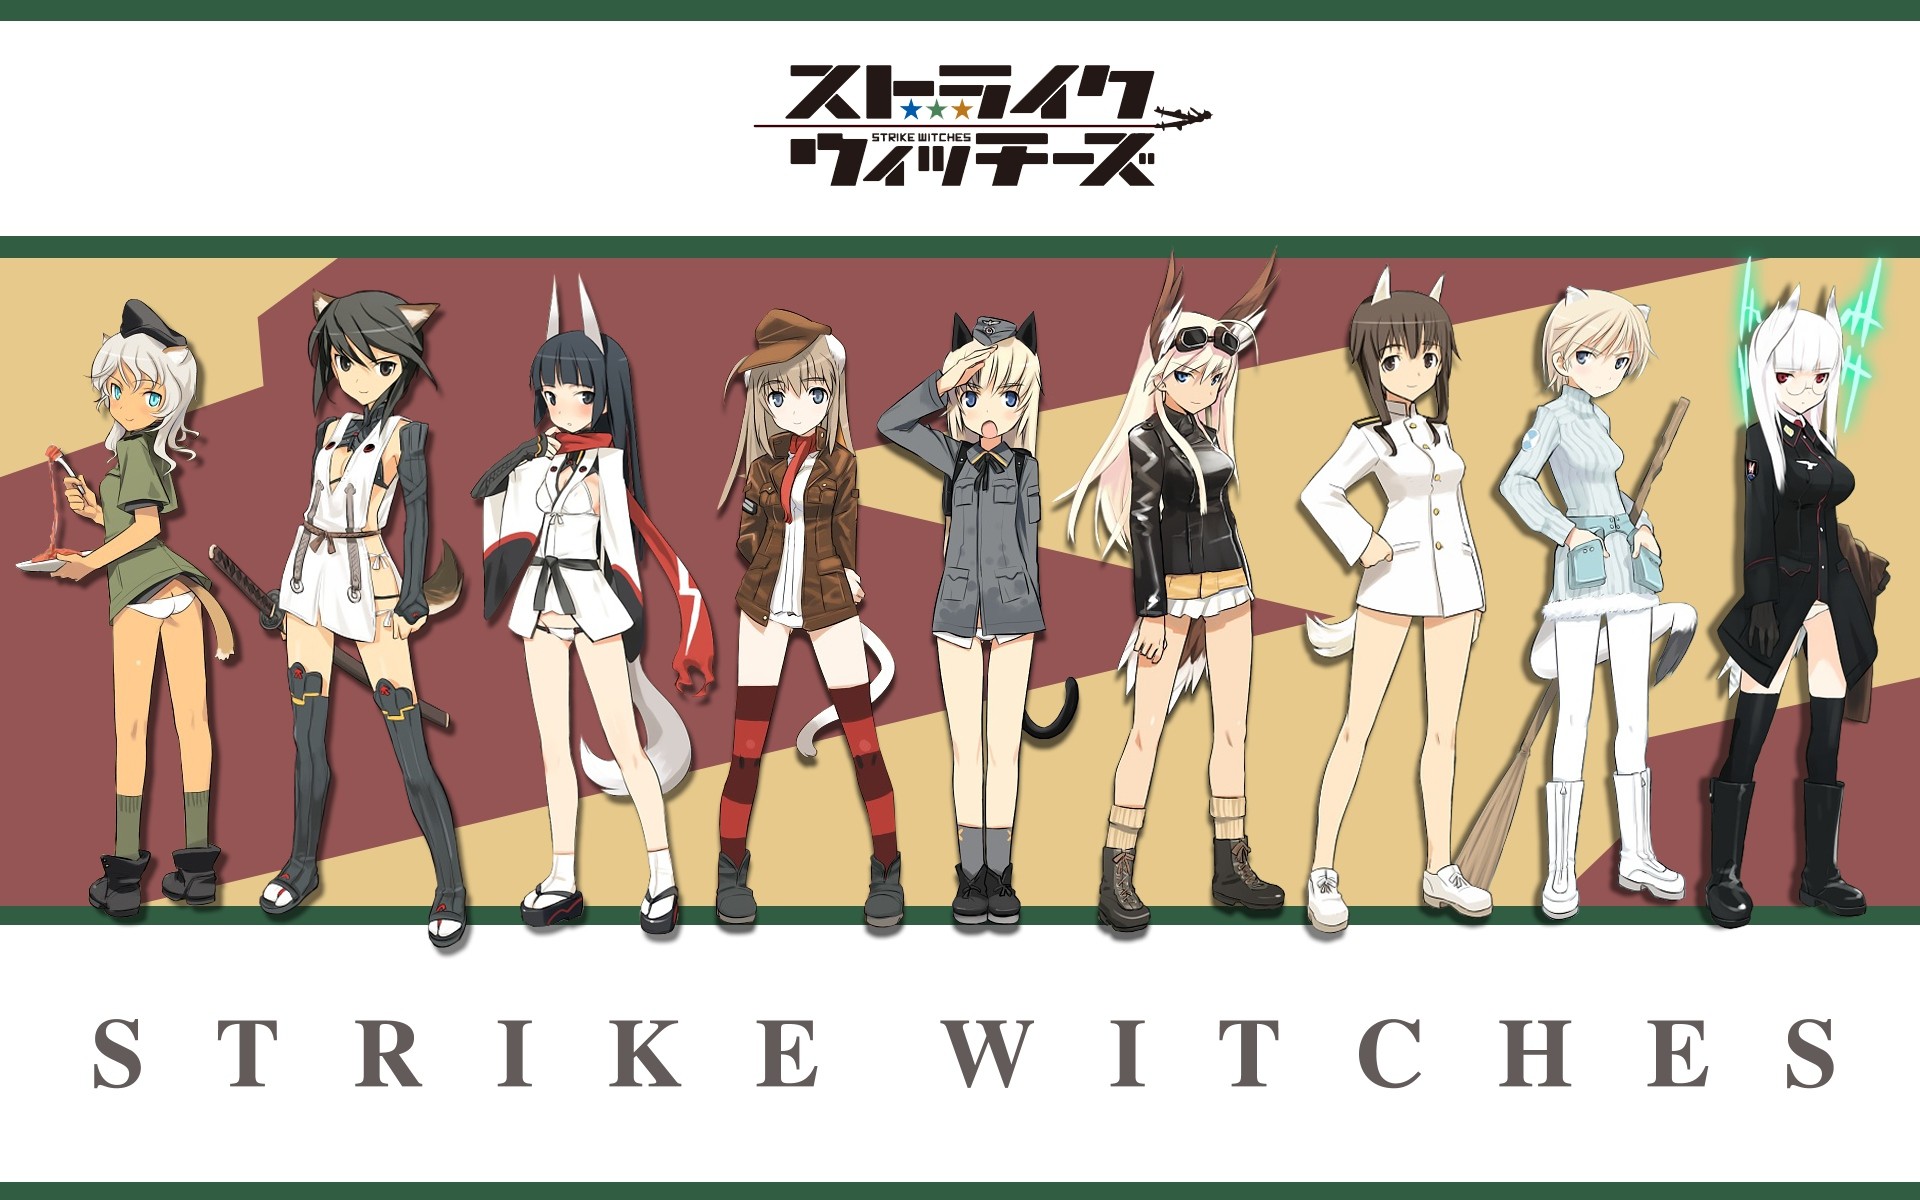 1920x1200 Anime - Strike Witches Wallpaper